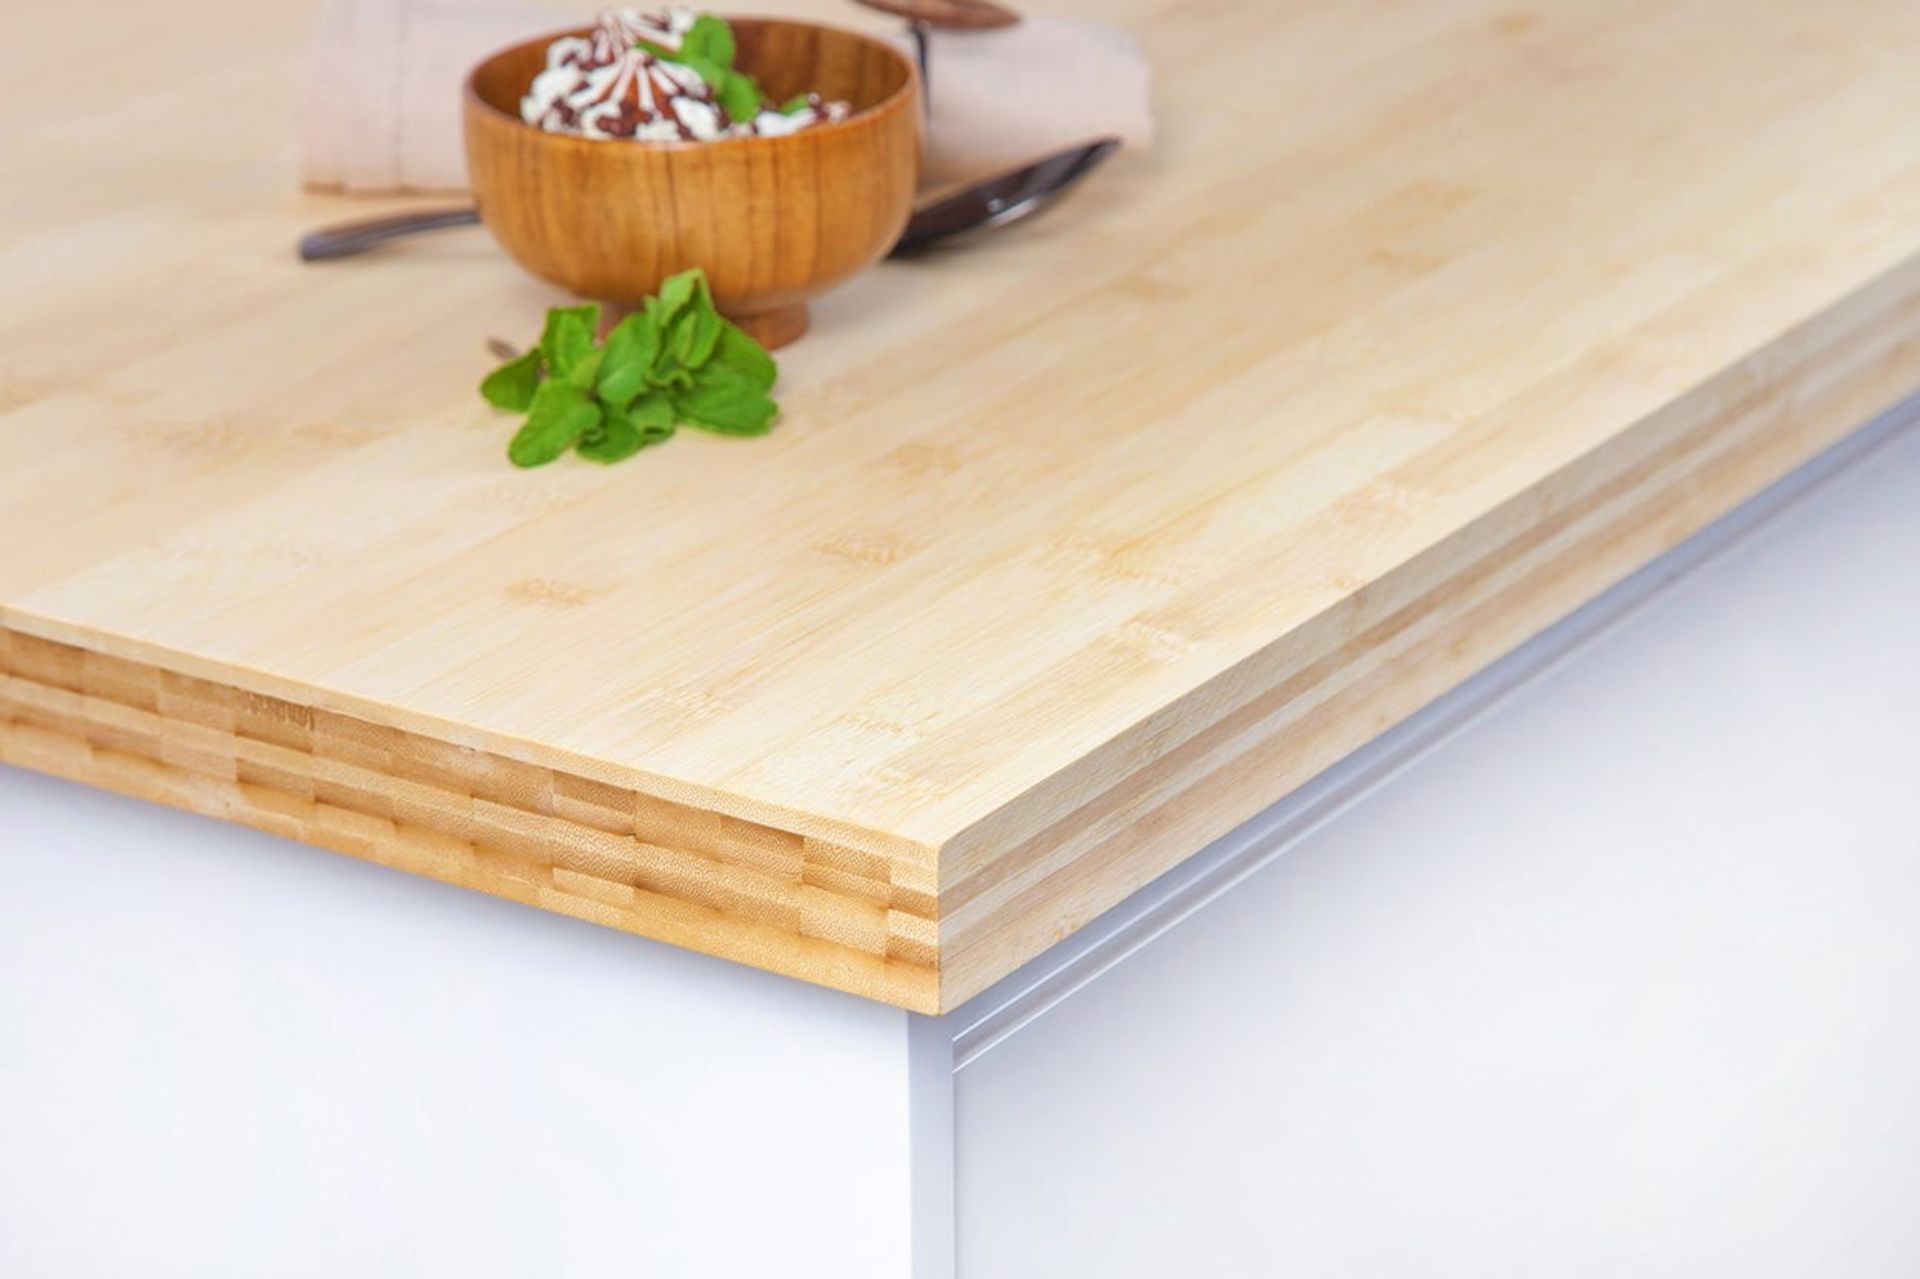 1 x Layered Solid Bamboo Wood Worktop - Size: 4000 x 650 x 40mm - Ideal For Kitchens, Countertops, - Image 3 of 5